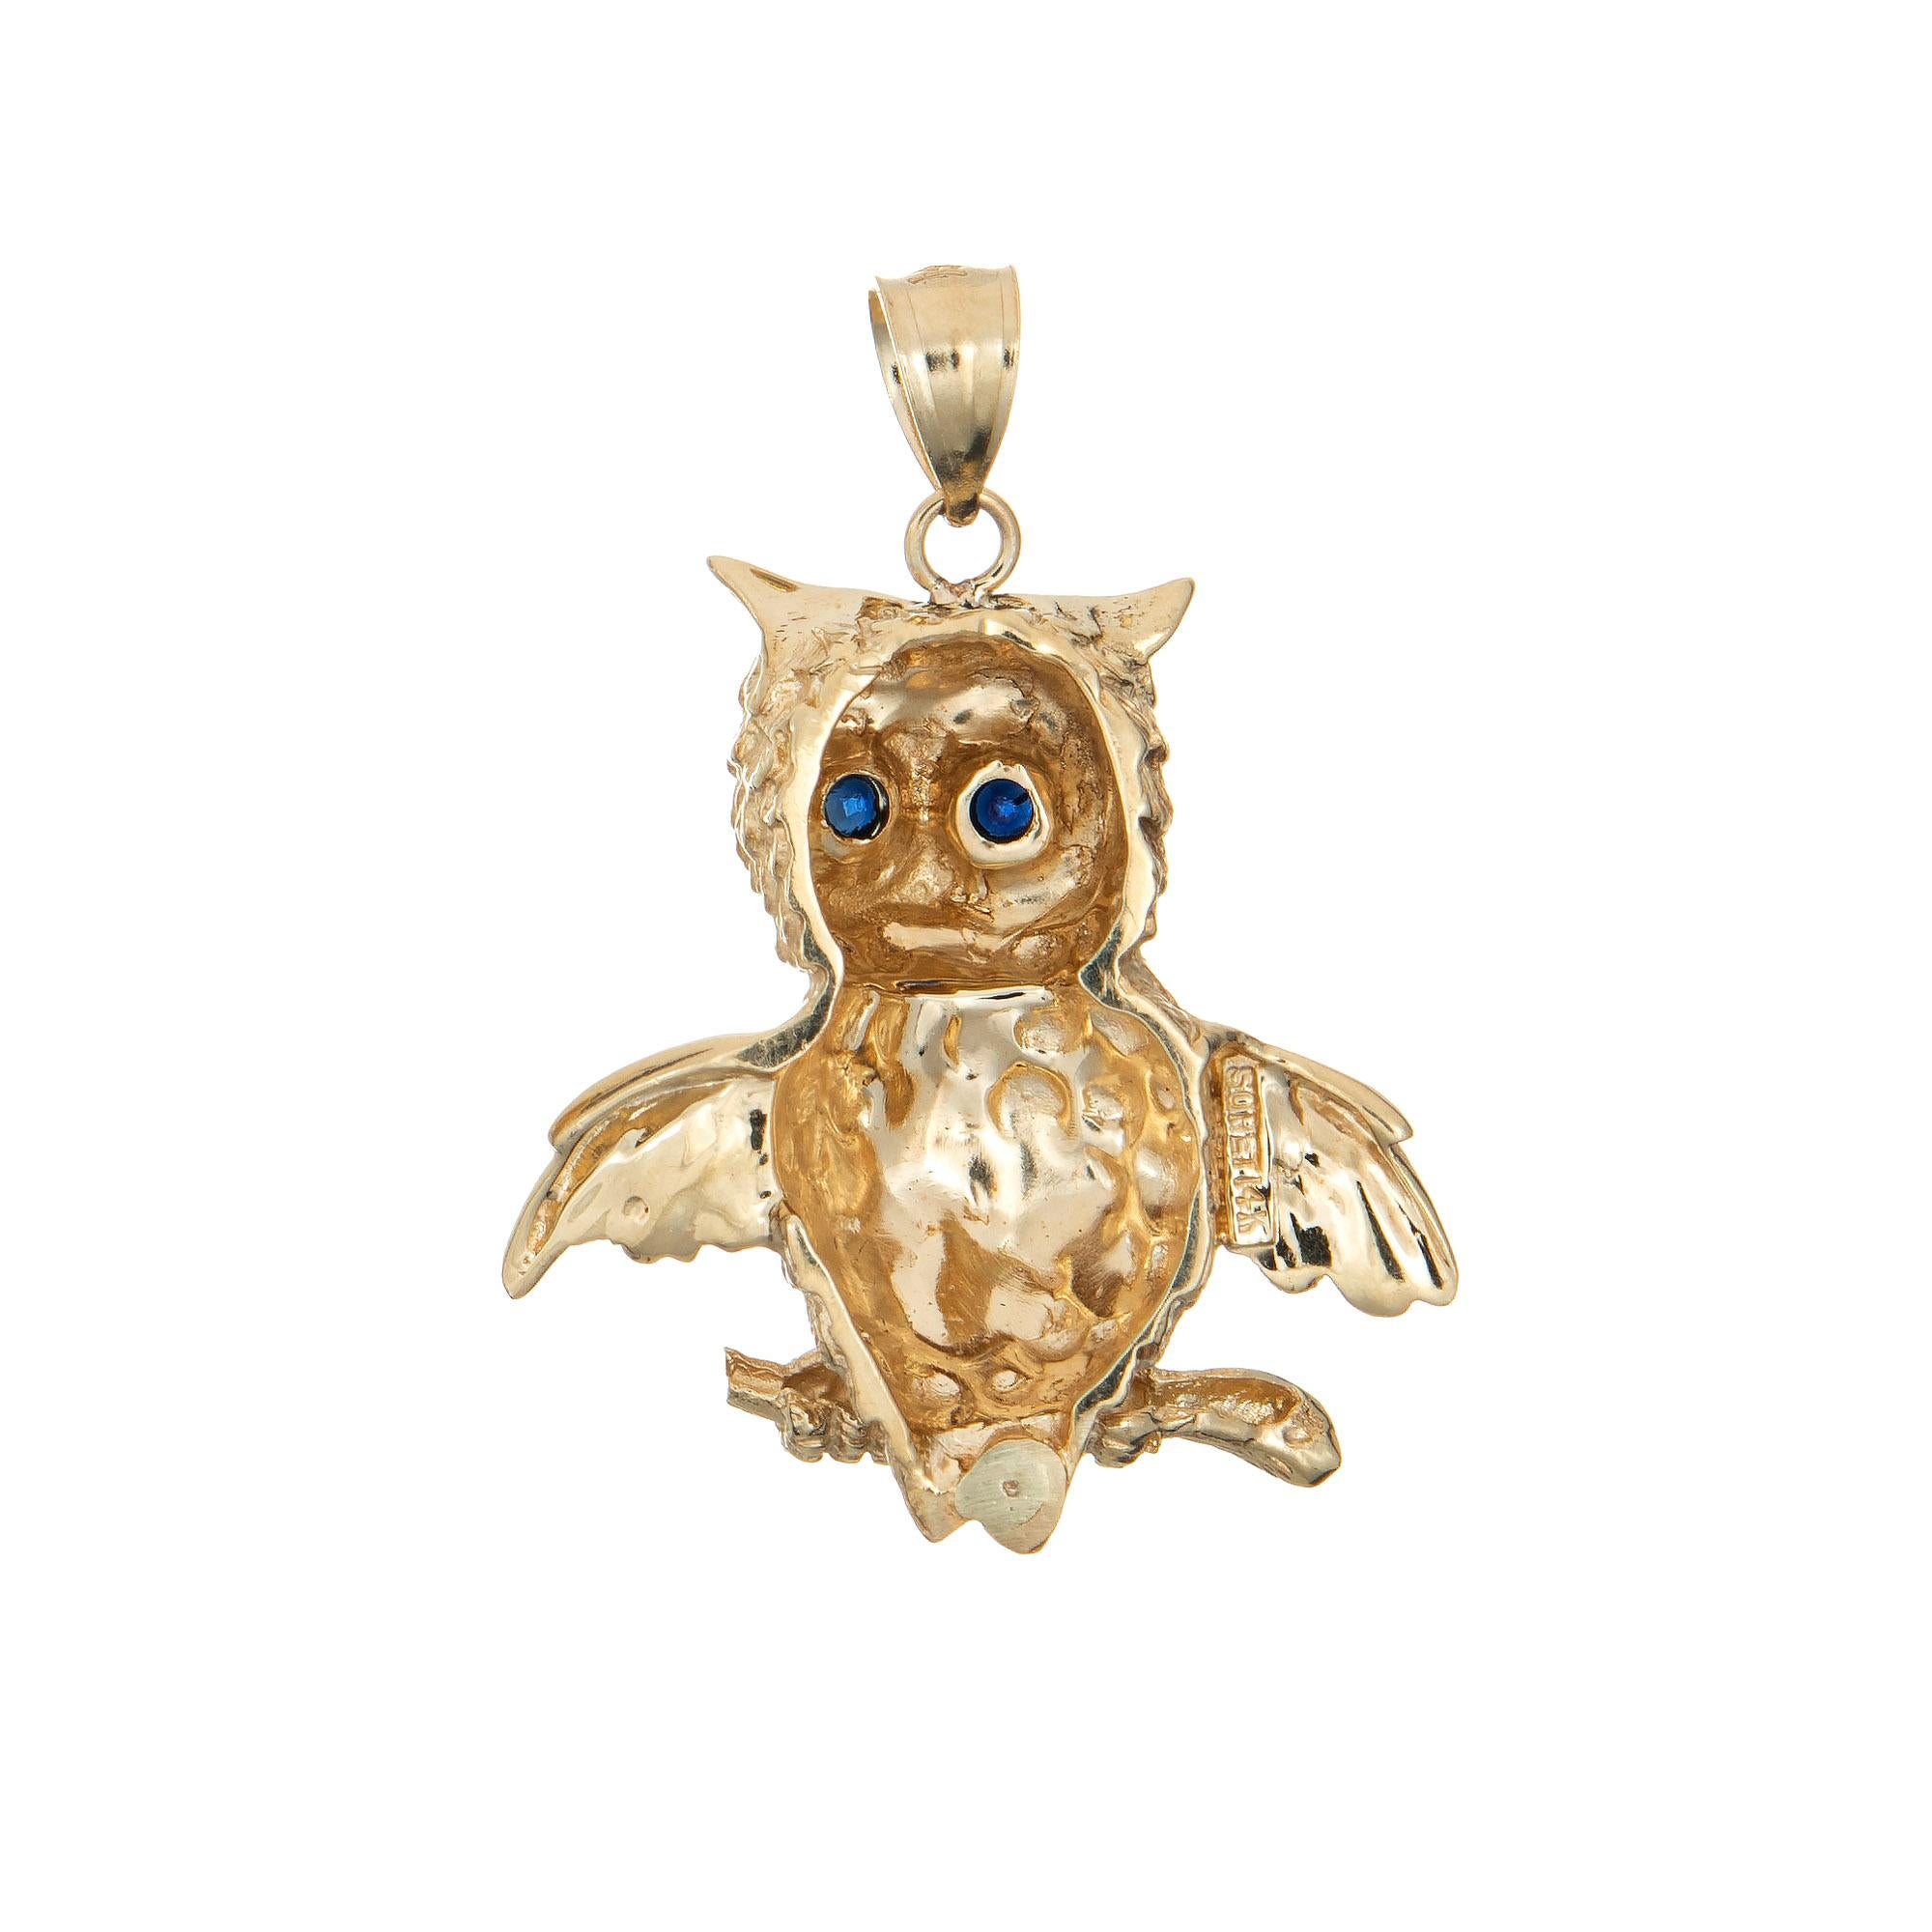 Finely detailed vintage owl pendant crafted in 14k yellow gold (circa 1970s to 1980s).  

Two estimated 0.05 carat sapphires are set into the eyes (0.10 carats total estimated weight). 

The charming & whimsical owl sits perched on a branch with